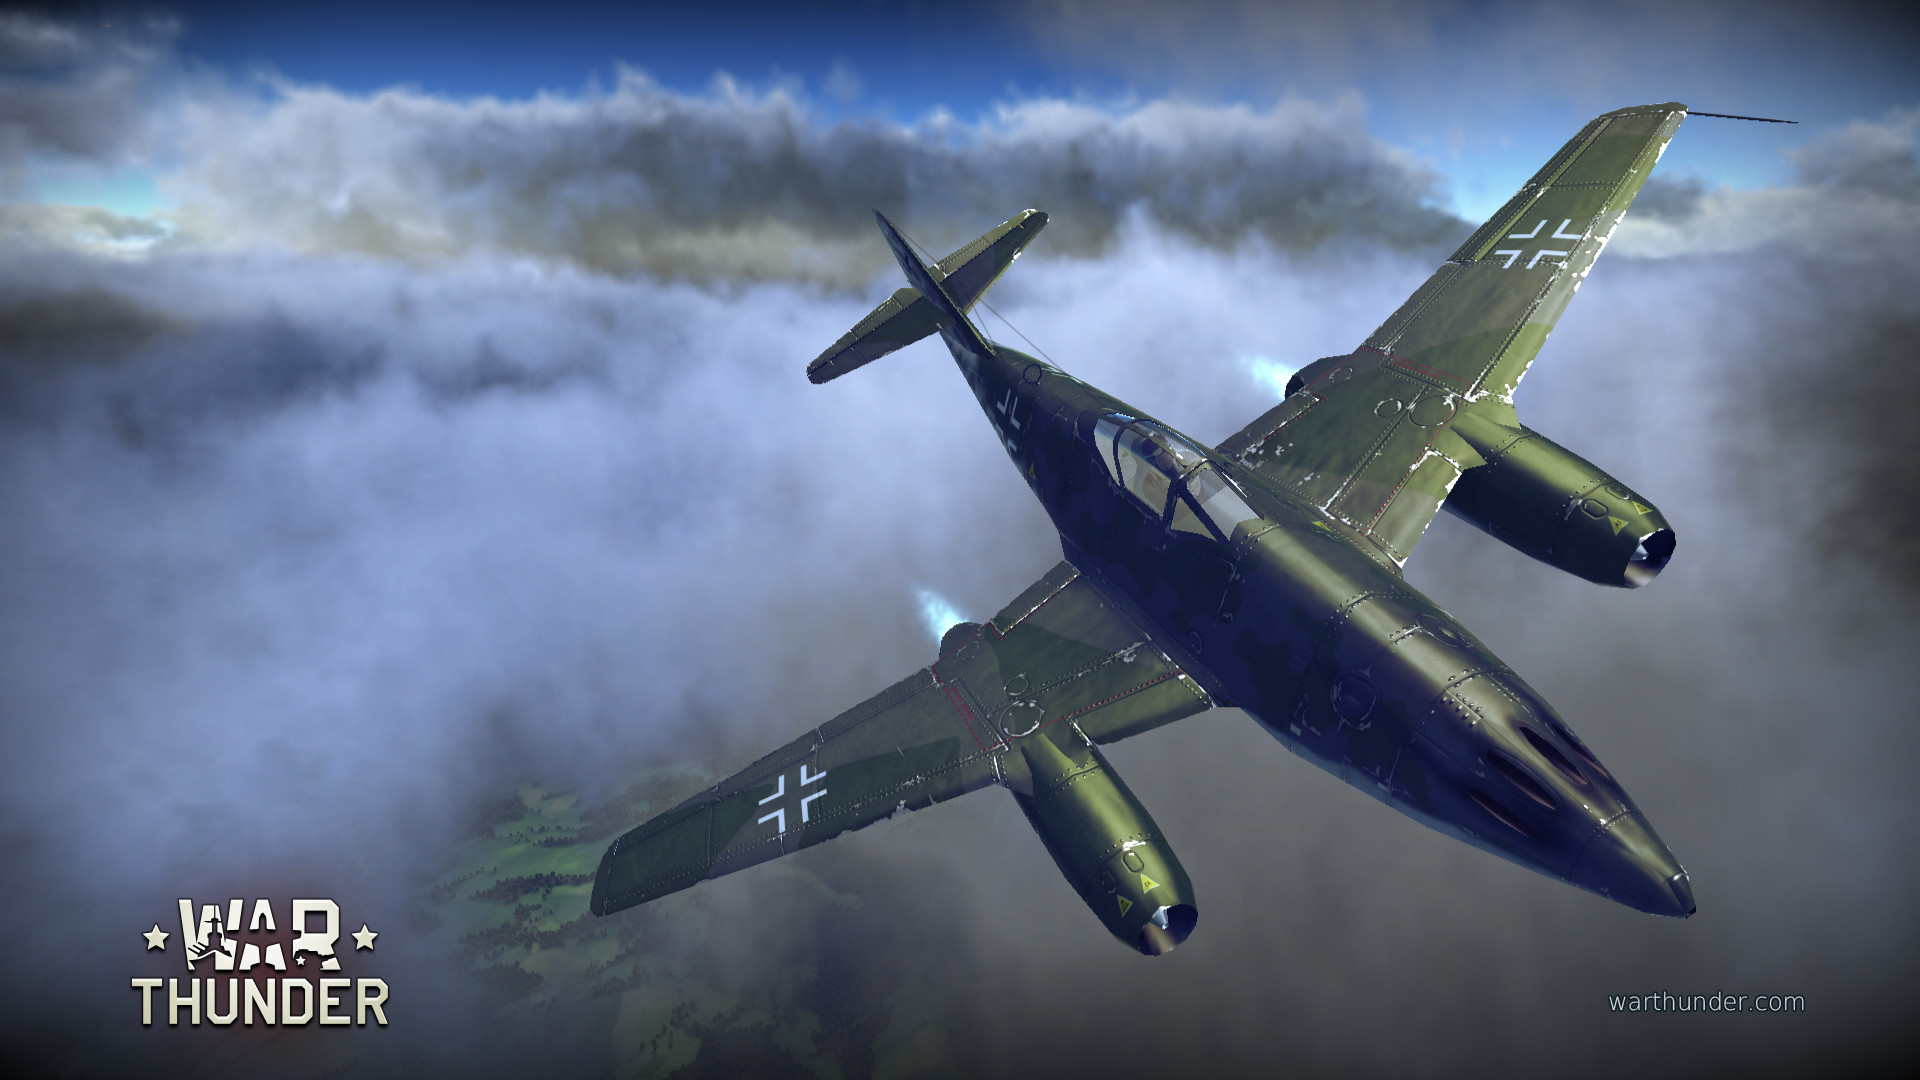 1920x1080 The historic Me 262 Schwalbe (Swallow) was the first jet-powered aircraft  to see combat. The project began in 1938 when Messerschmitt was called upon  to ...